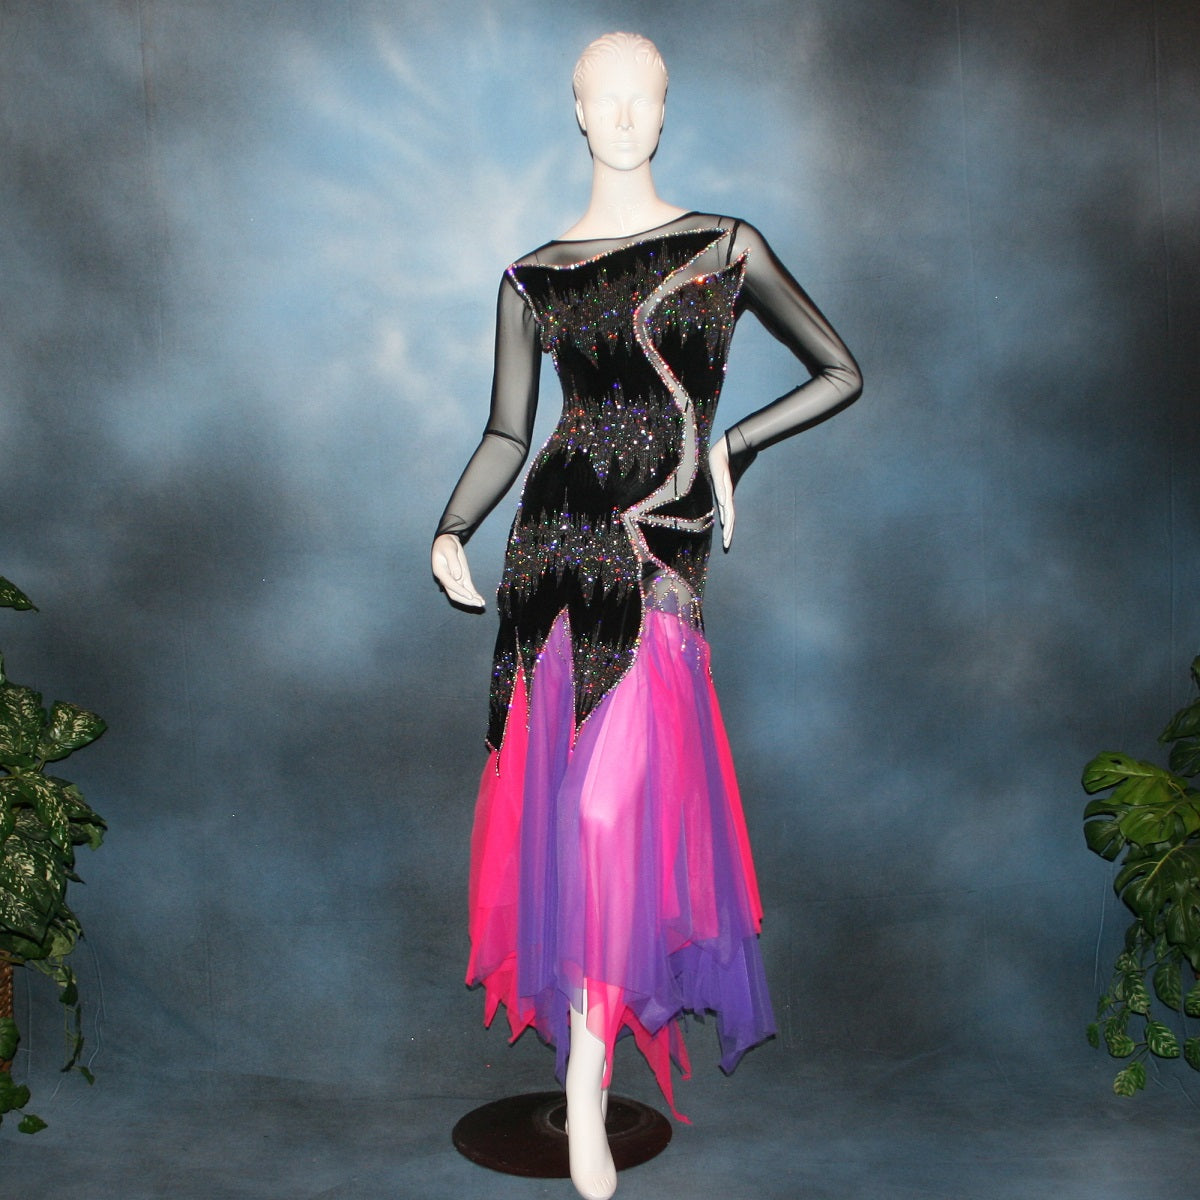 Crystal's Creations purple & pink underskirt with Latin/rhythm/converta ballroom dress created in black glitter slinky with an awesome electrifying Crystal AB glitter pattern artistically placed on a black stretch mesh base, embellished with Swarovski Crystal AB rhinestone work. It includes 3 skirts so you have 4 different looks for versatility.